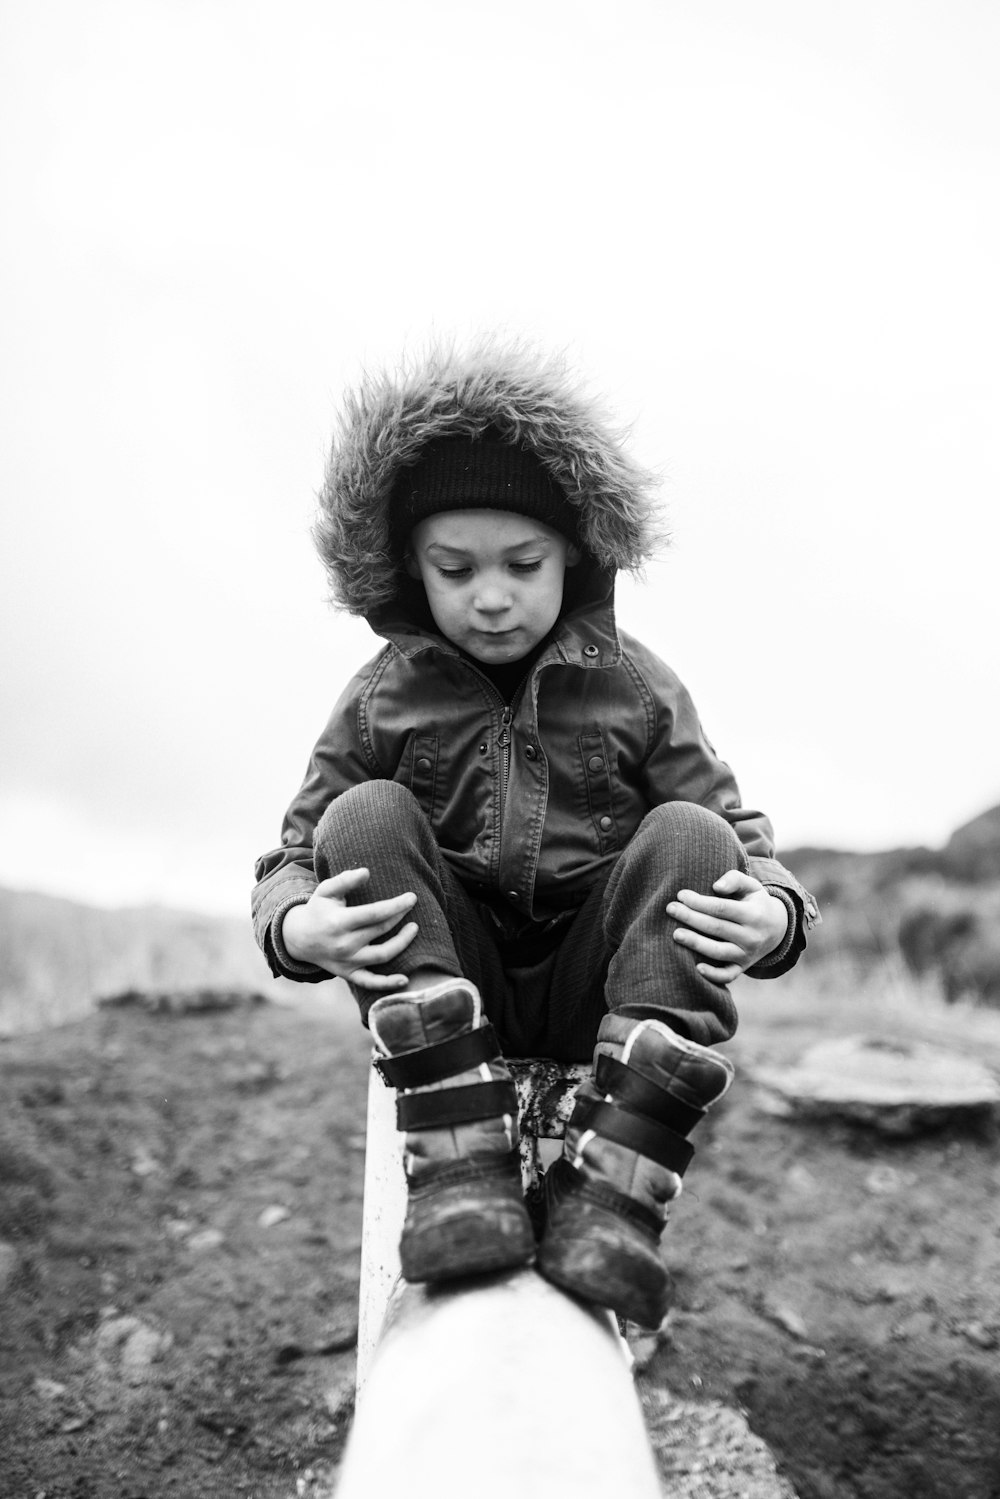 grayscale photo of girl in jacket and boots sitting on ground